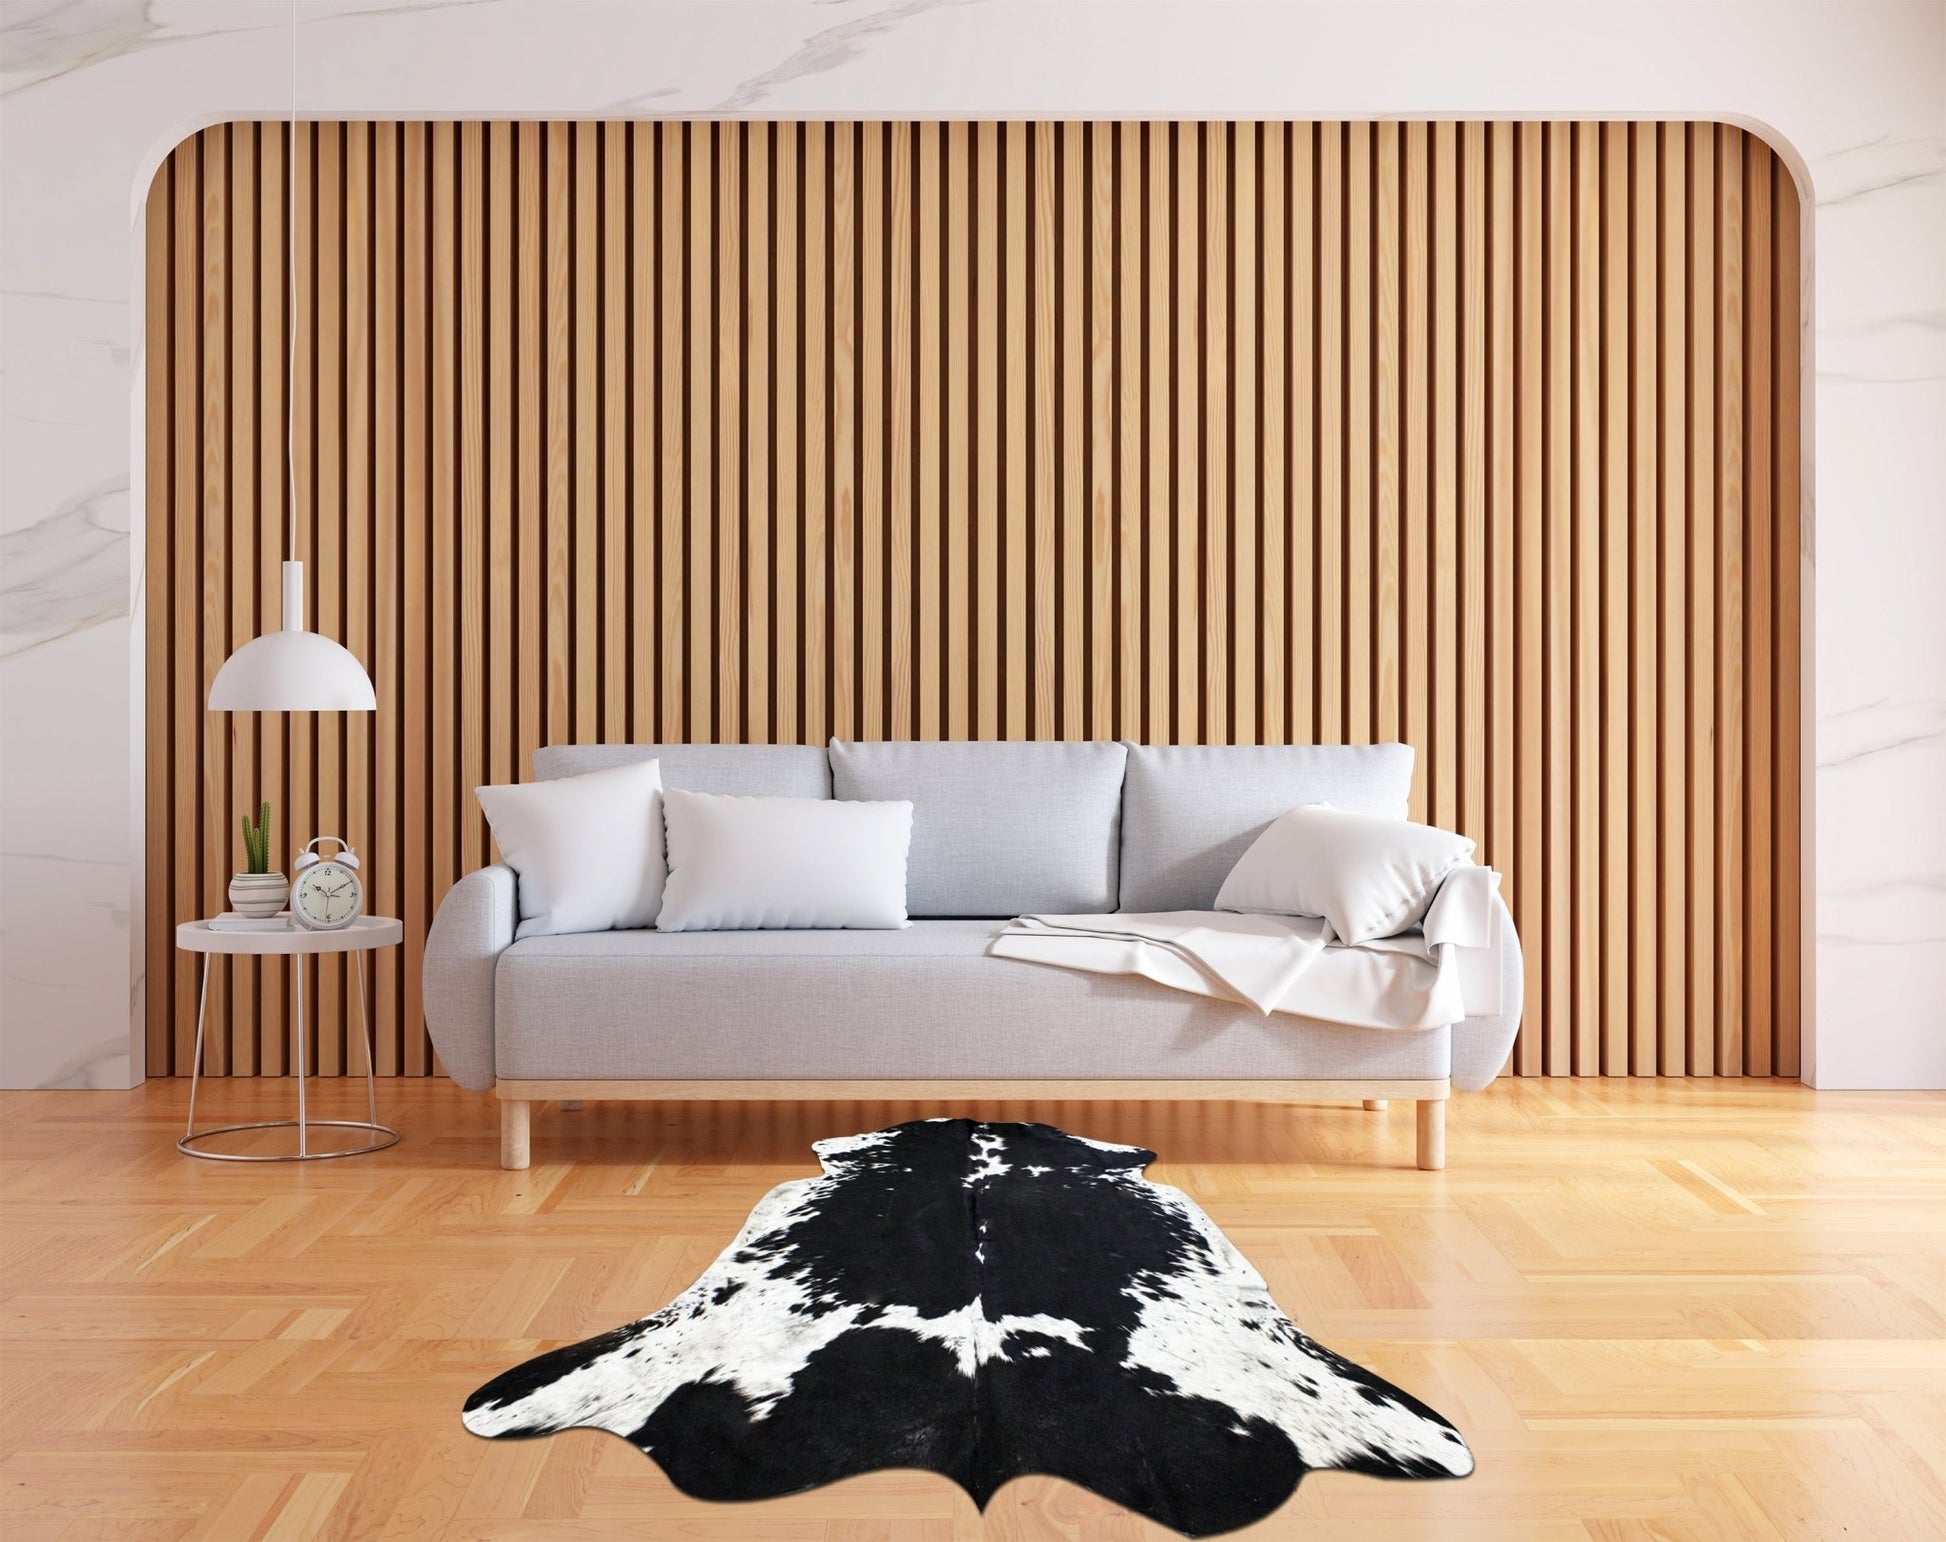 Large Black and White Cowhide Rug - Rodeo Cowhide Rugs